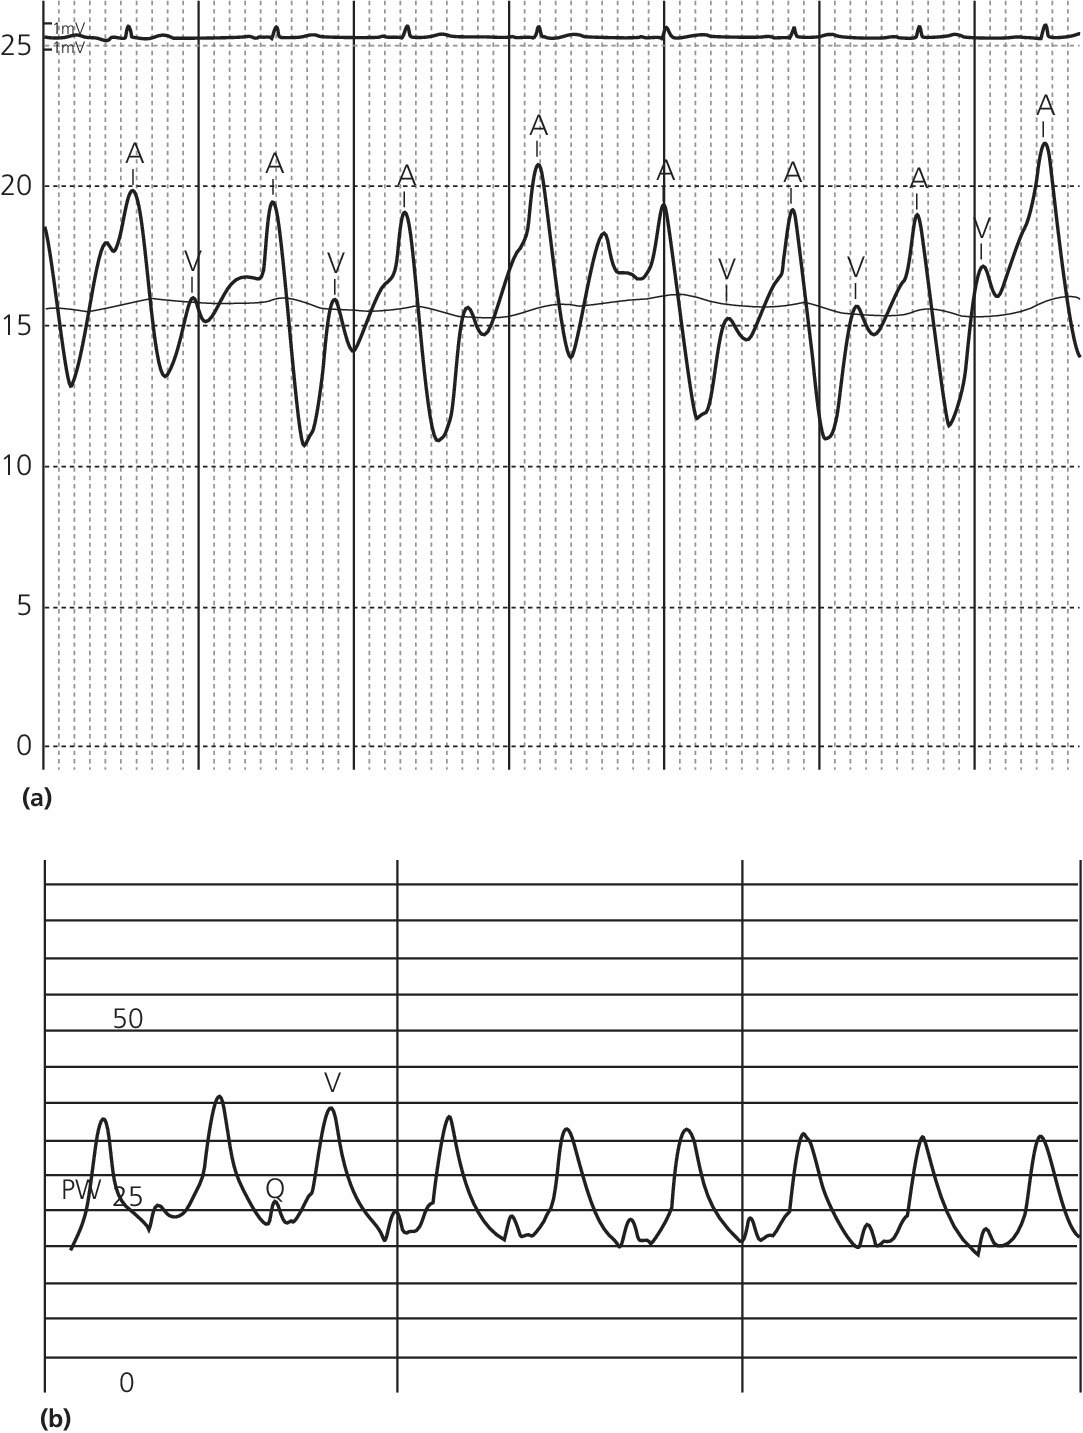 2 ECGs displaying prominent A waves (top) and prominent B waves (bottom).